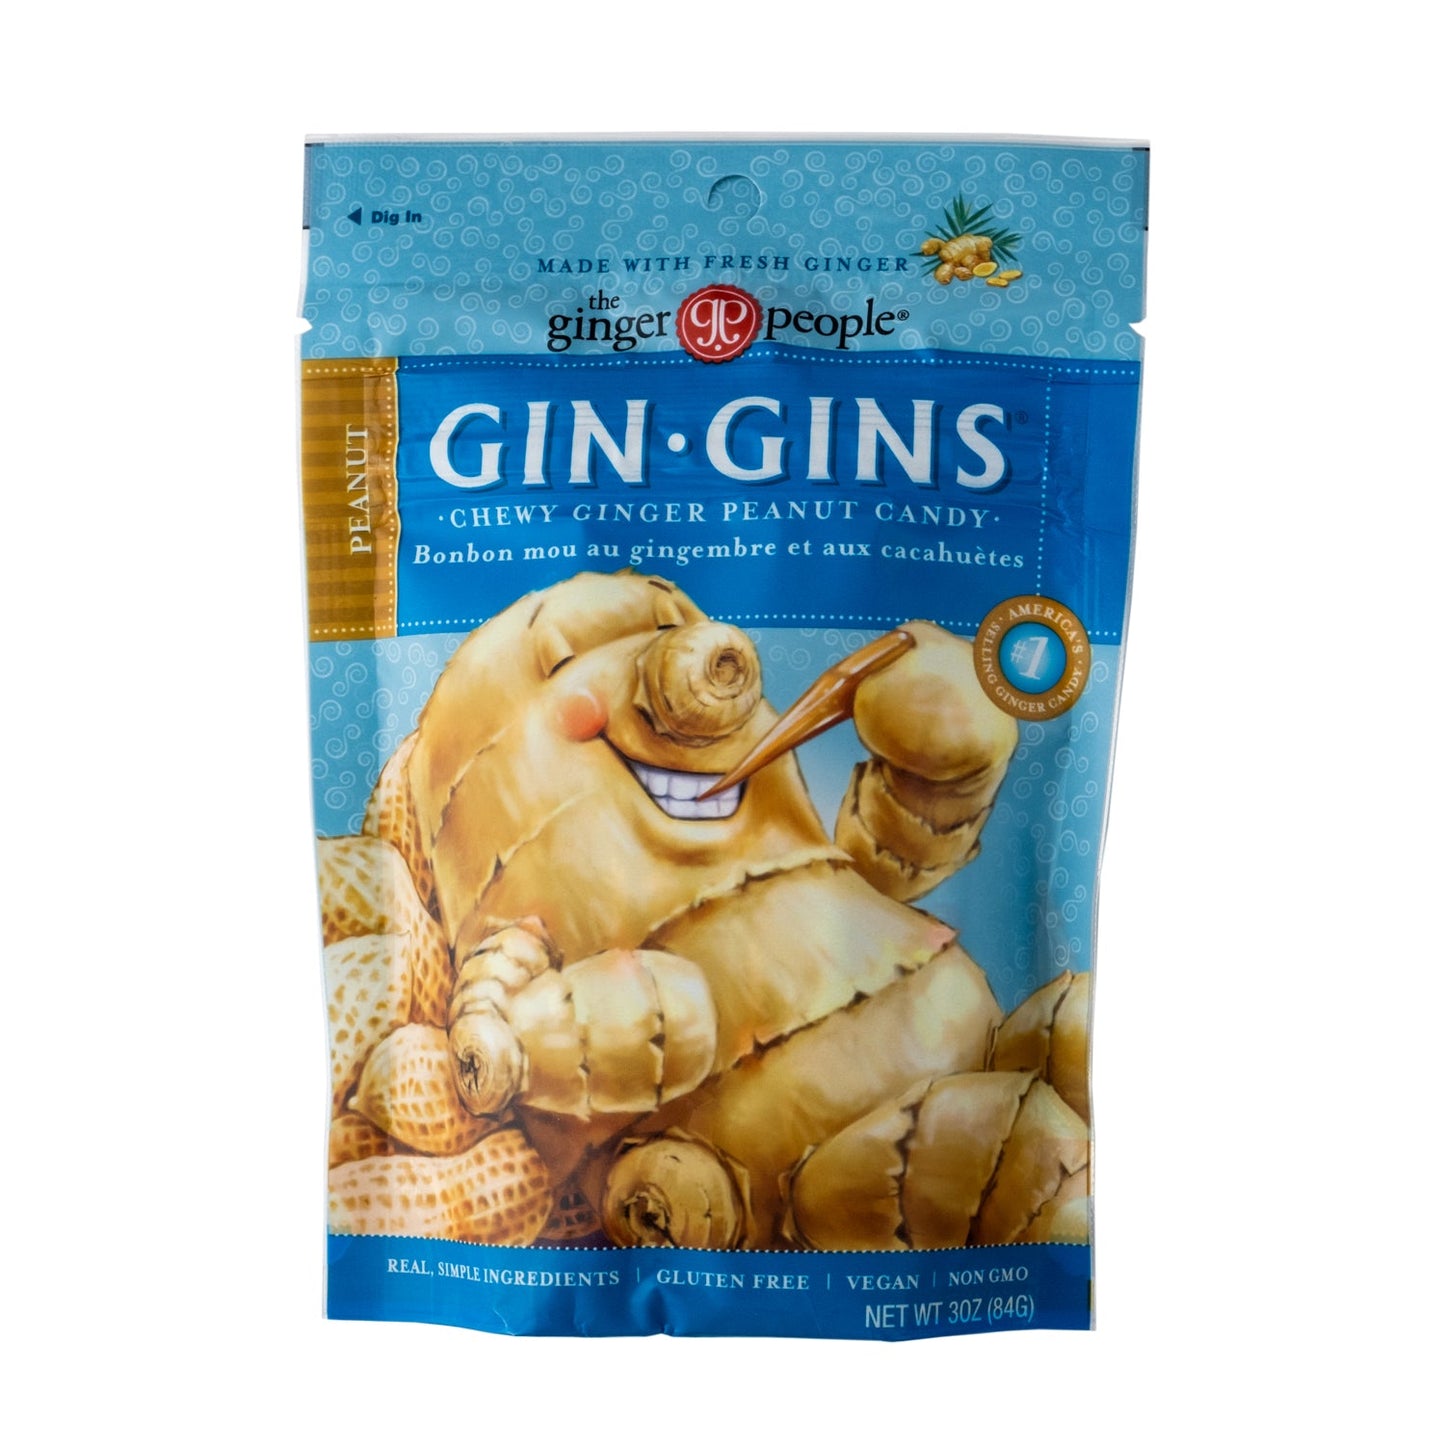 Ginger People Gin Gins Chewy Ginger Peanut Candy 84g